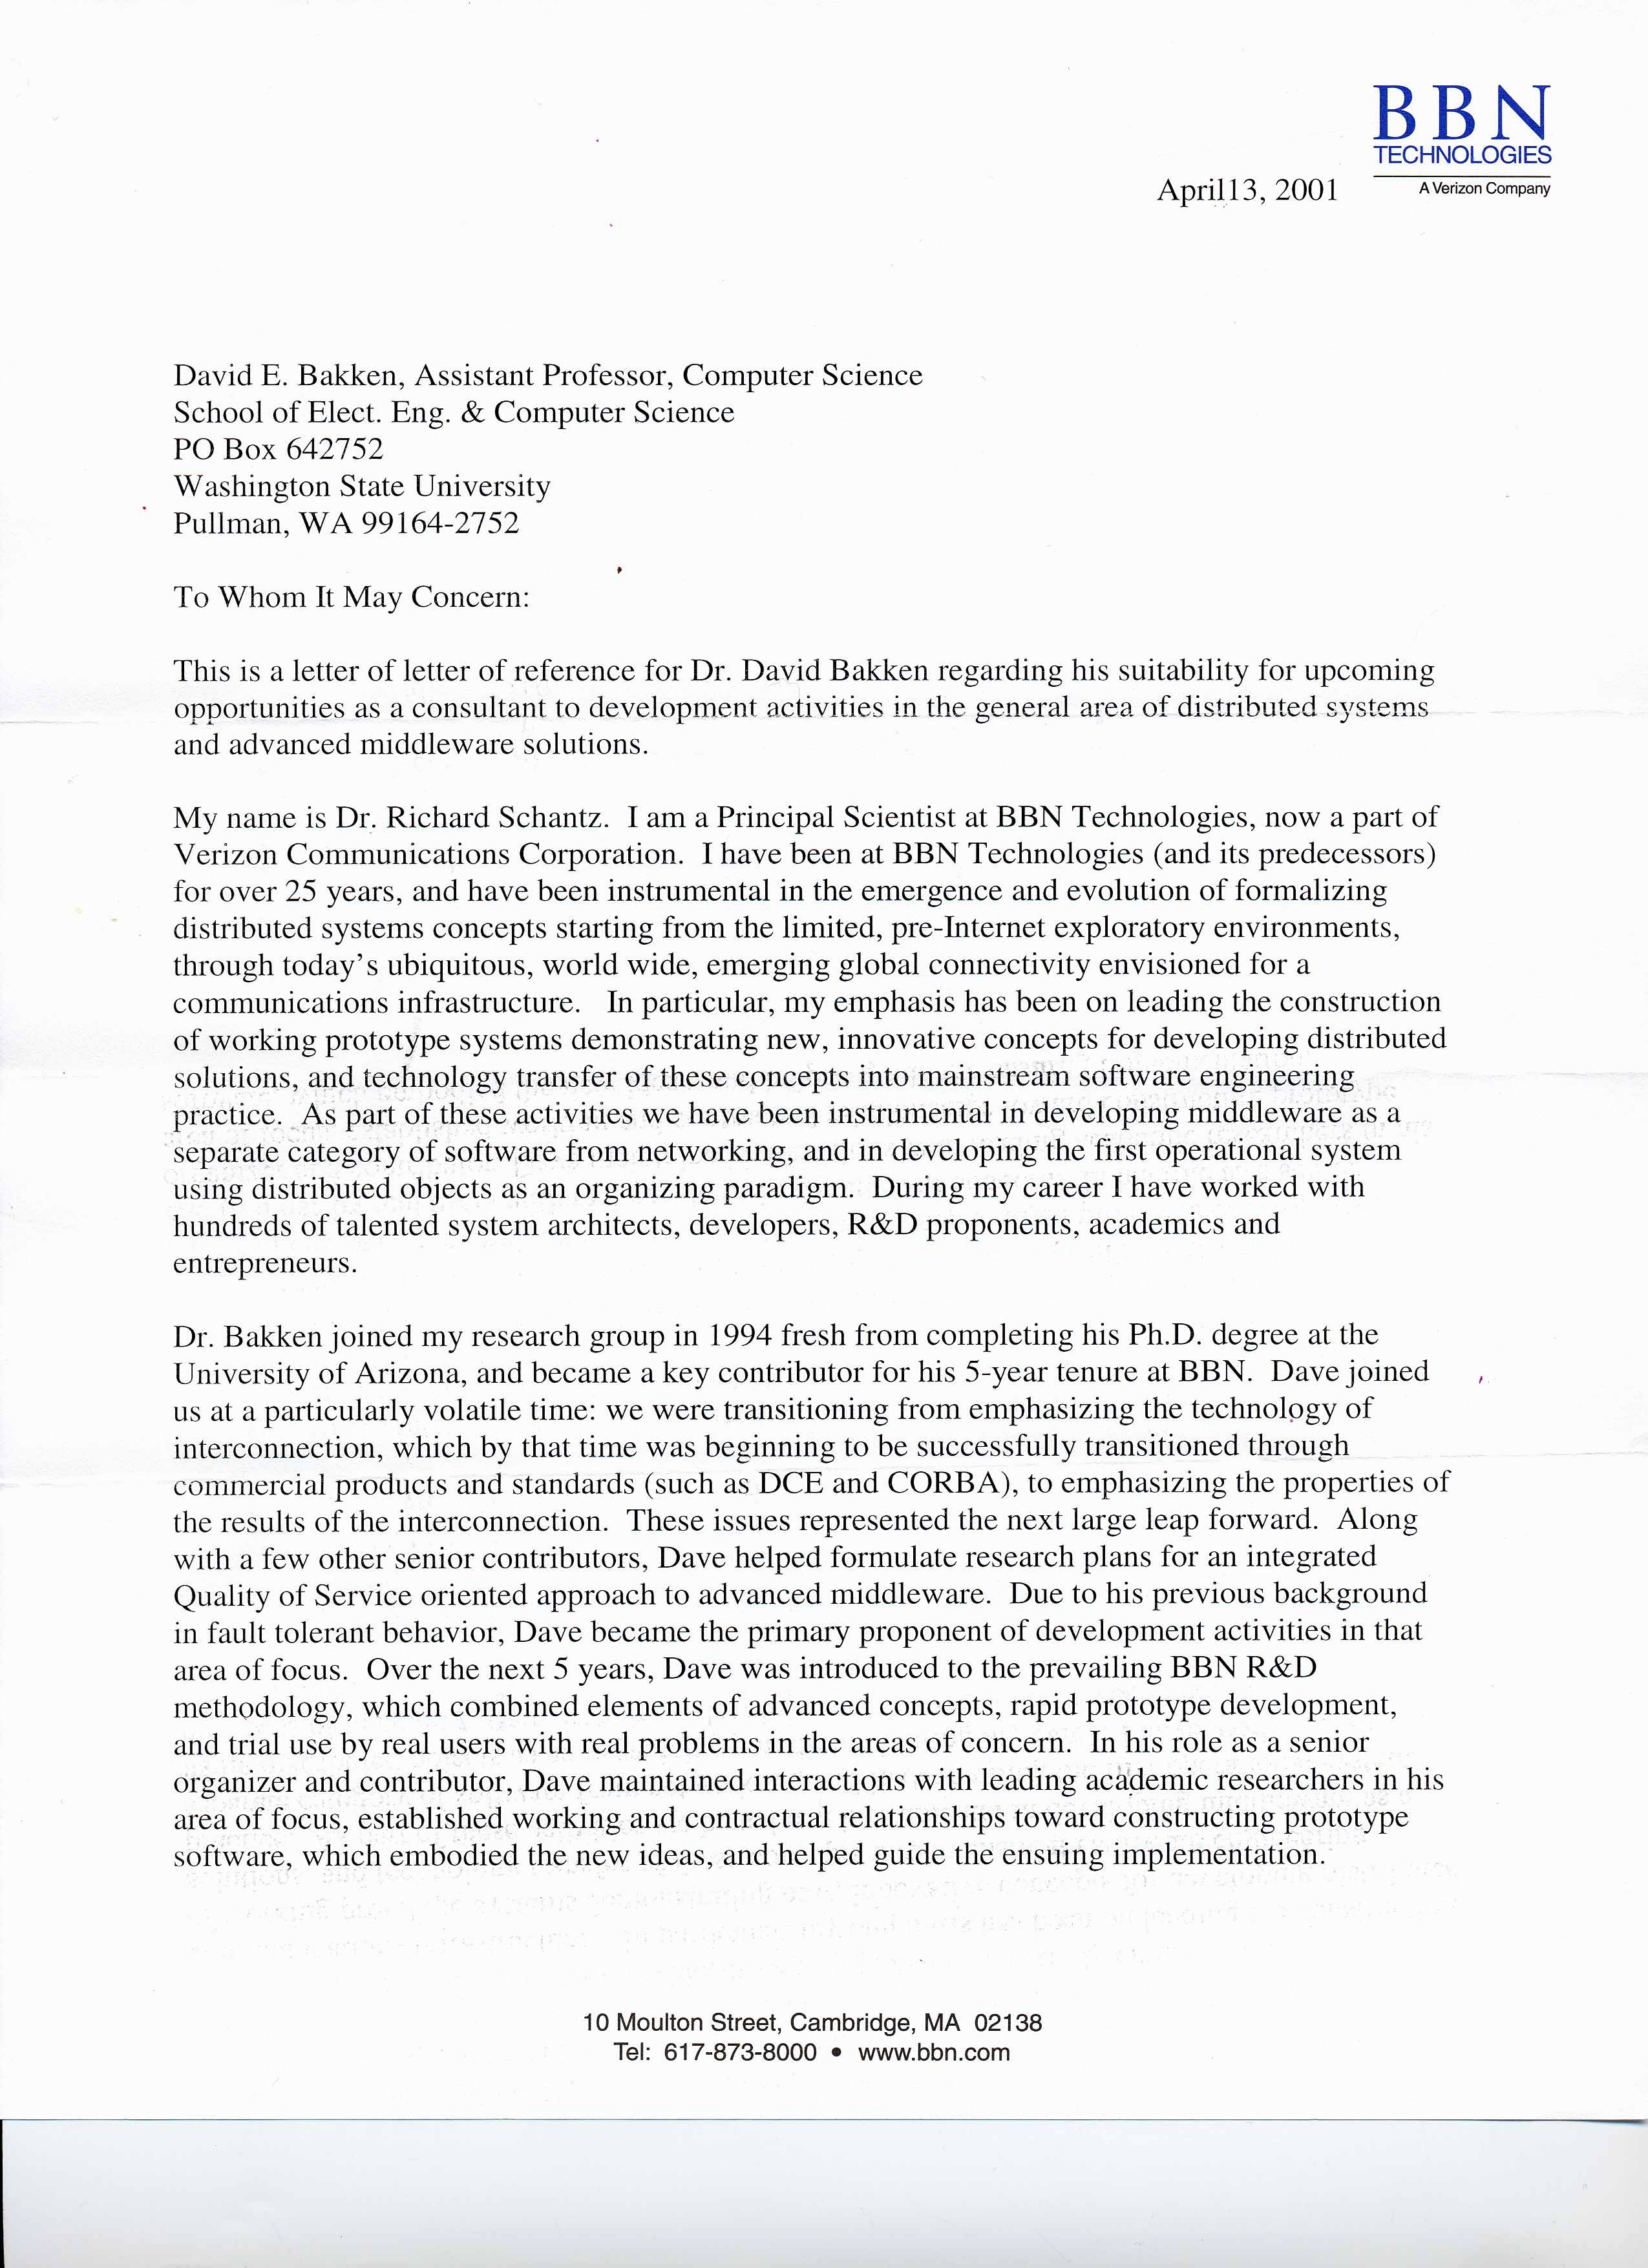 Uc Berkeley Recommendation Letter Inspirational Consulting Letters Of Reference for Dr